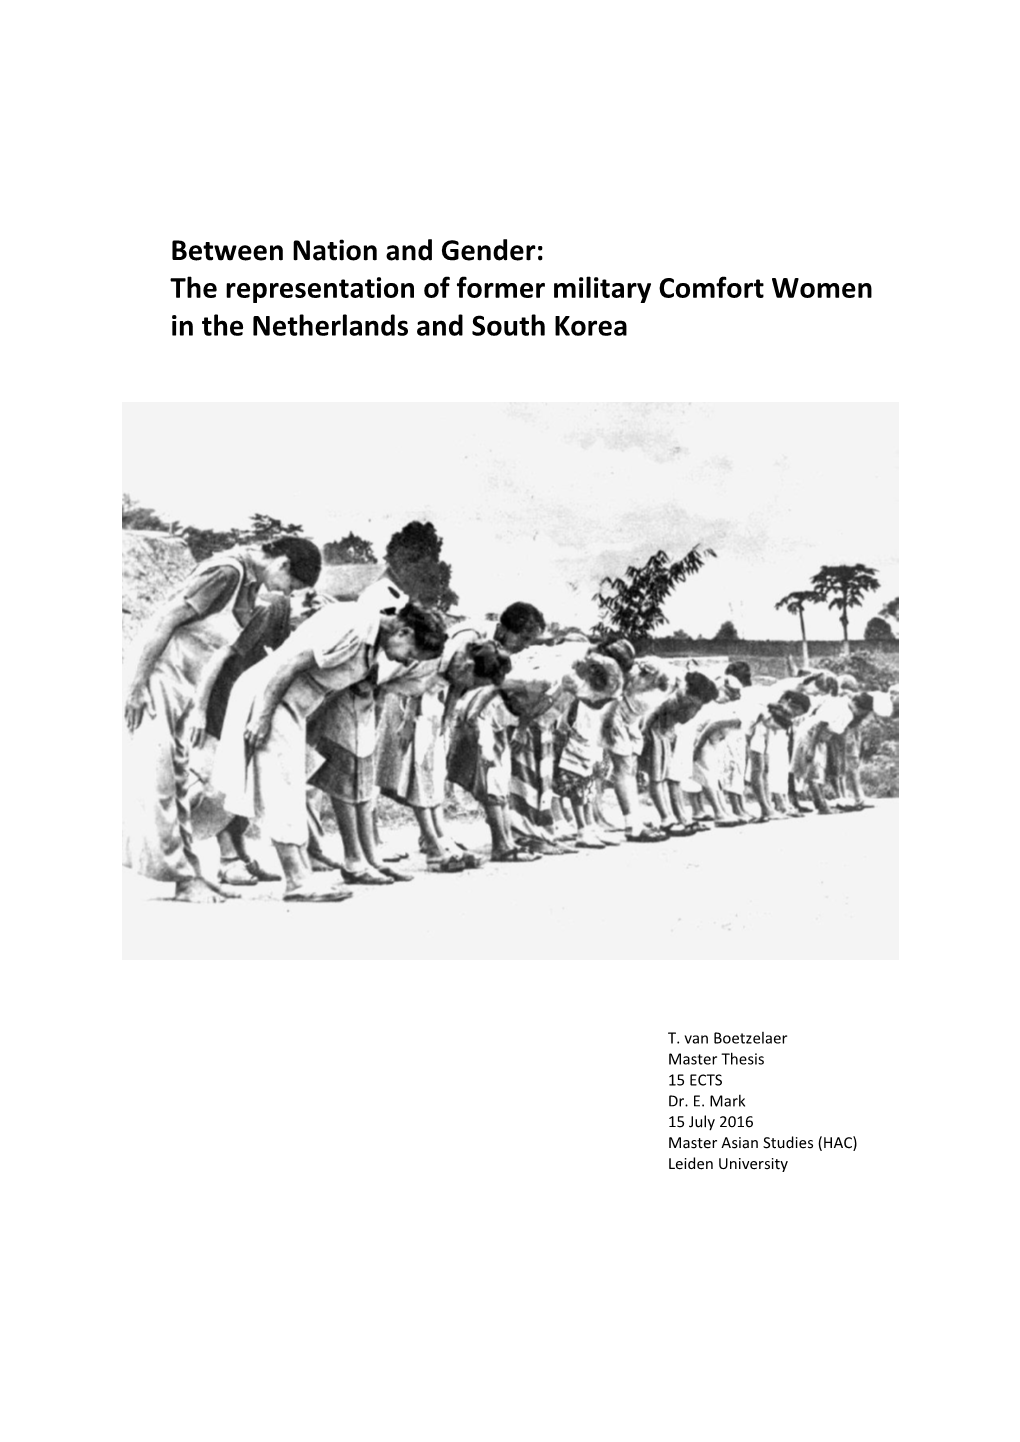 The Representation of Former Military Comfort Women in the Netherlands and South Korea